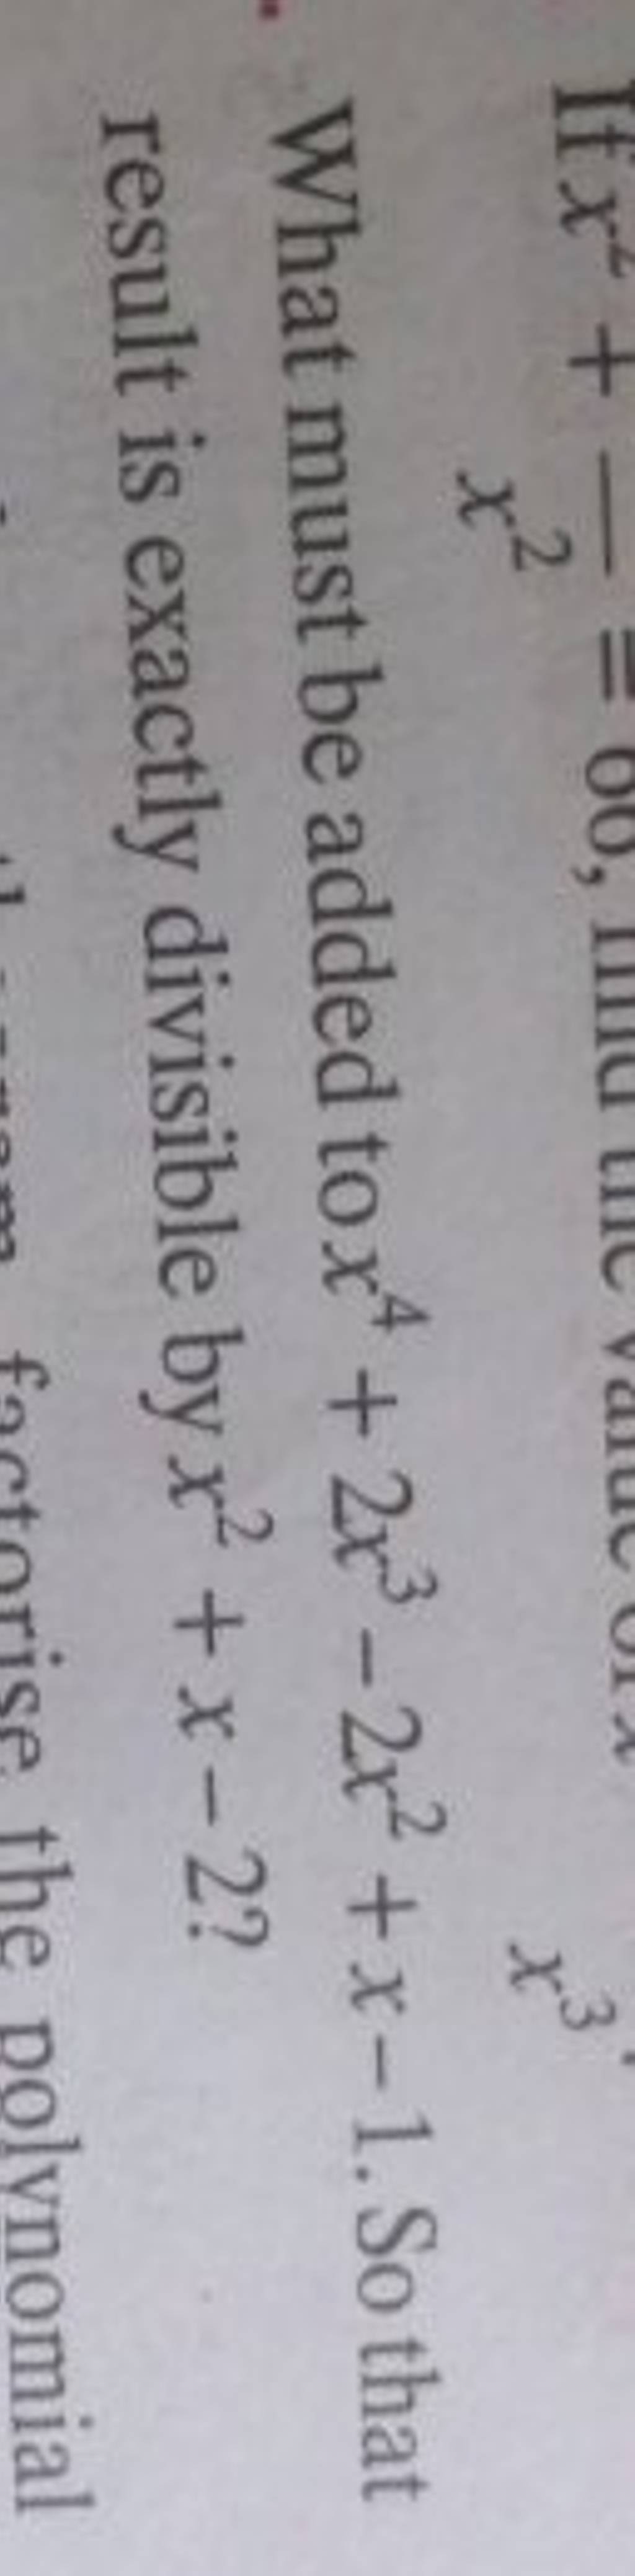 What must be added to x4+2x3−2x2+x−1. So that result is exactly divisi